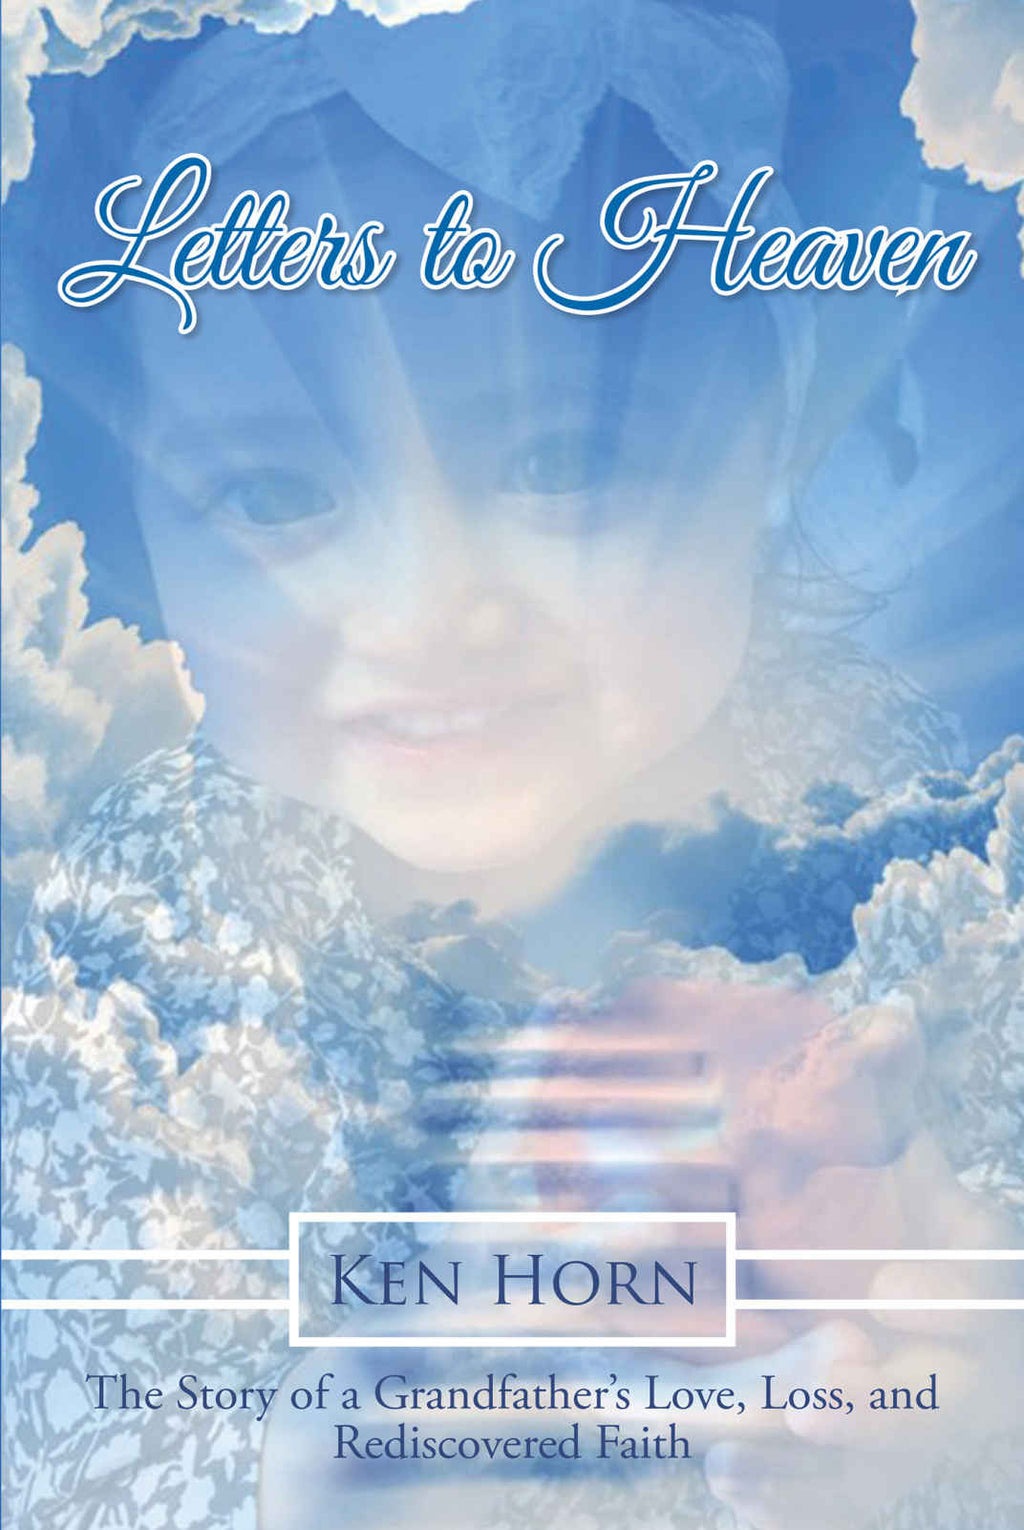 Letters to Heaven - Paperback and Hardcover Available